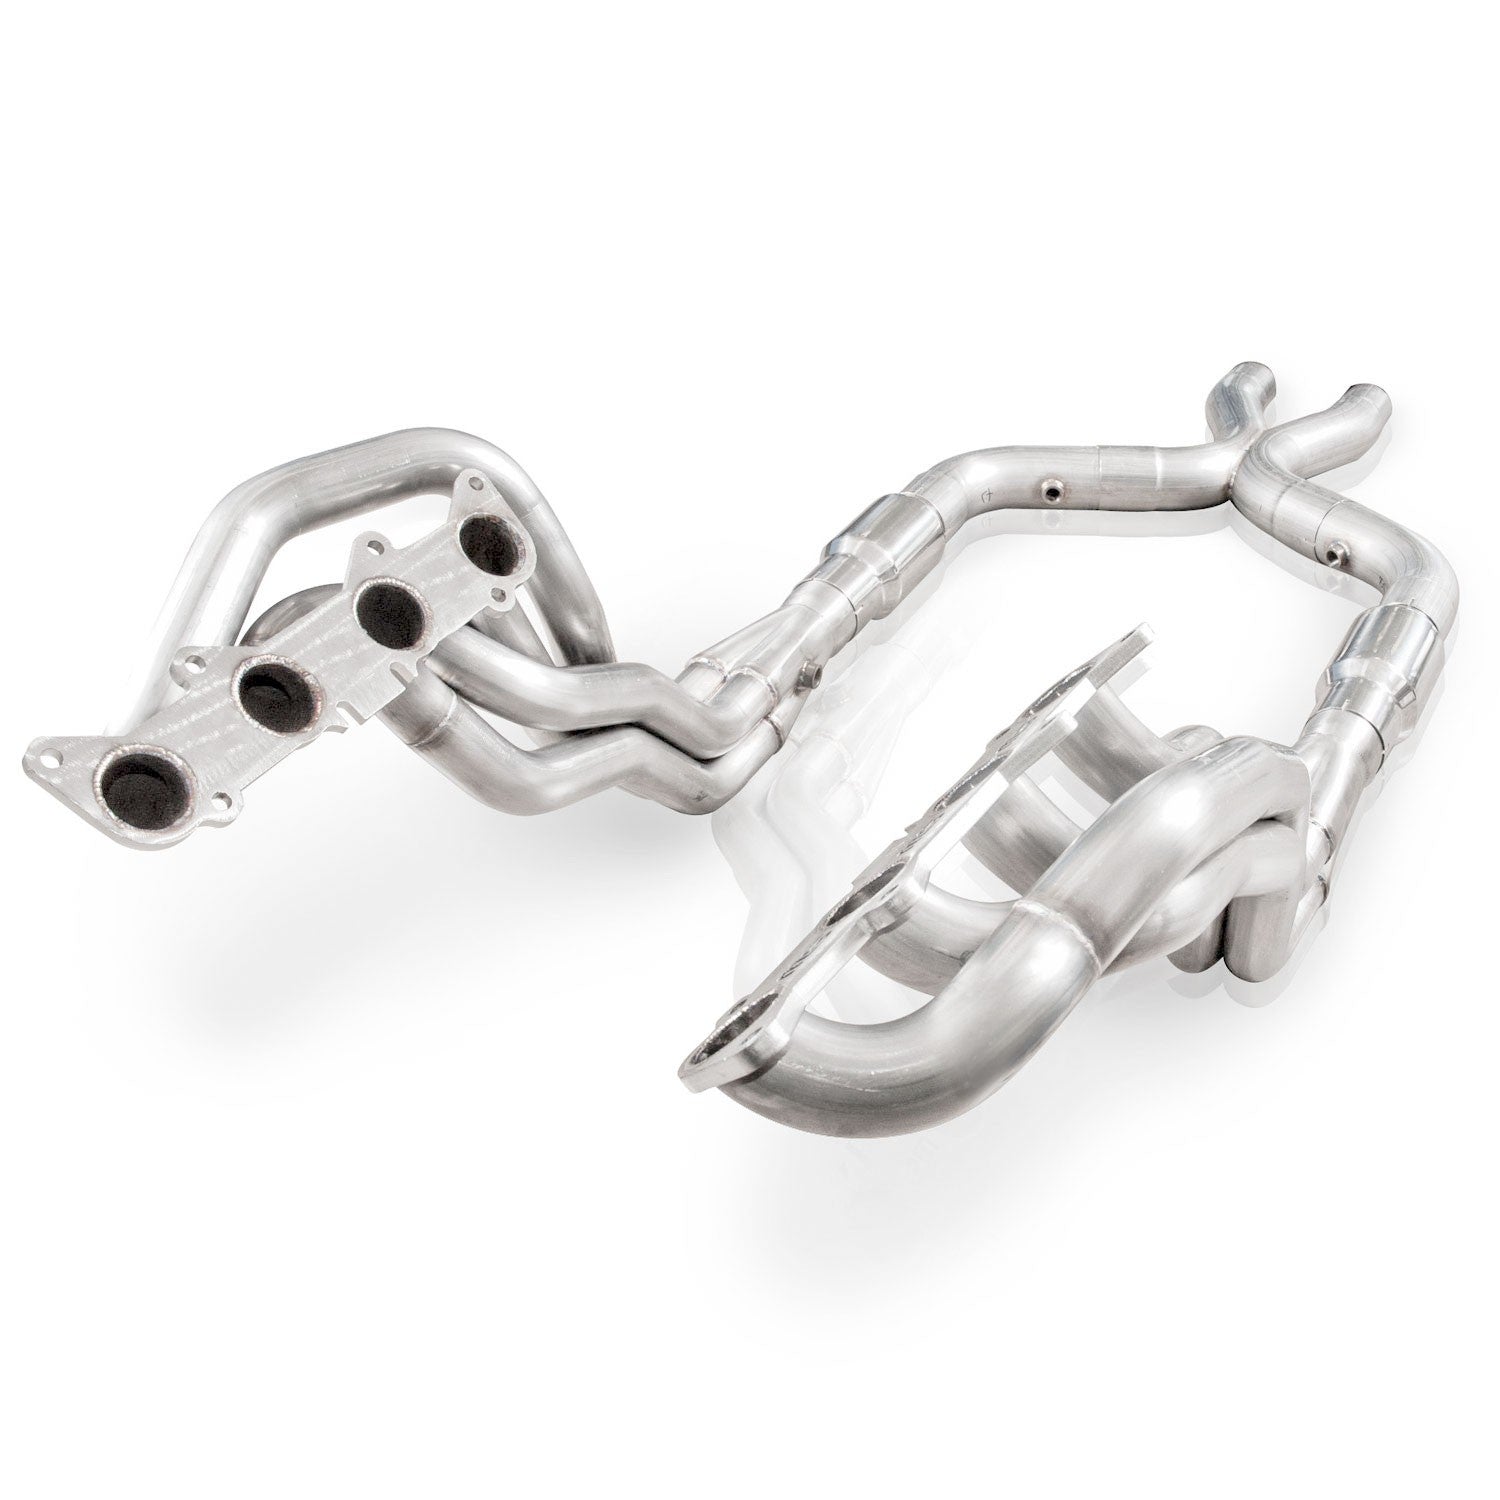 Stainless Works SP Ford Mustang GT 2011-14 Headers 1-7/8" with Catted X-Pipe SM11HCATX